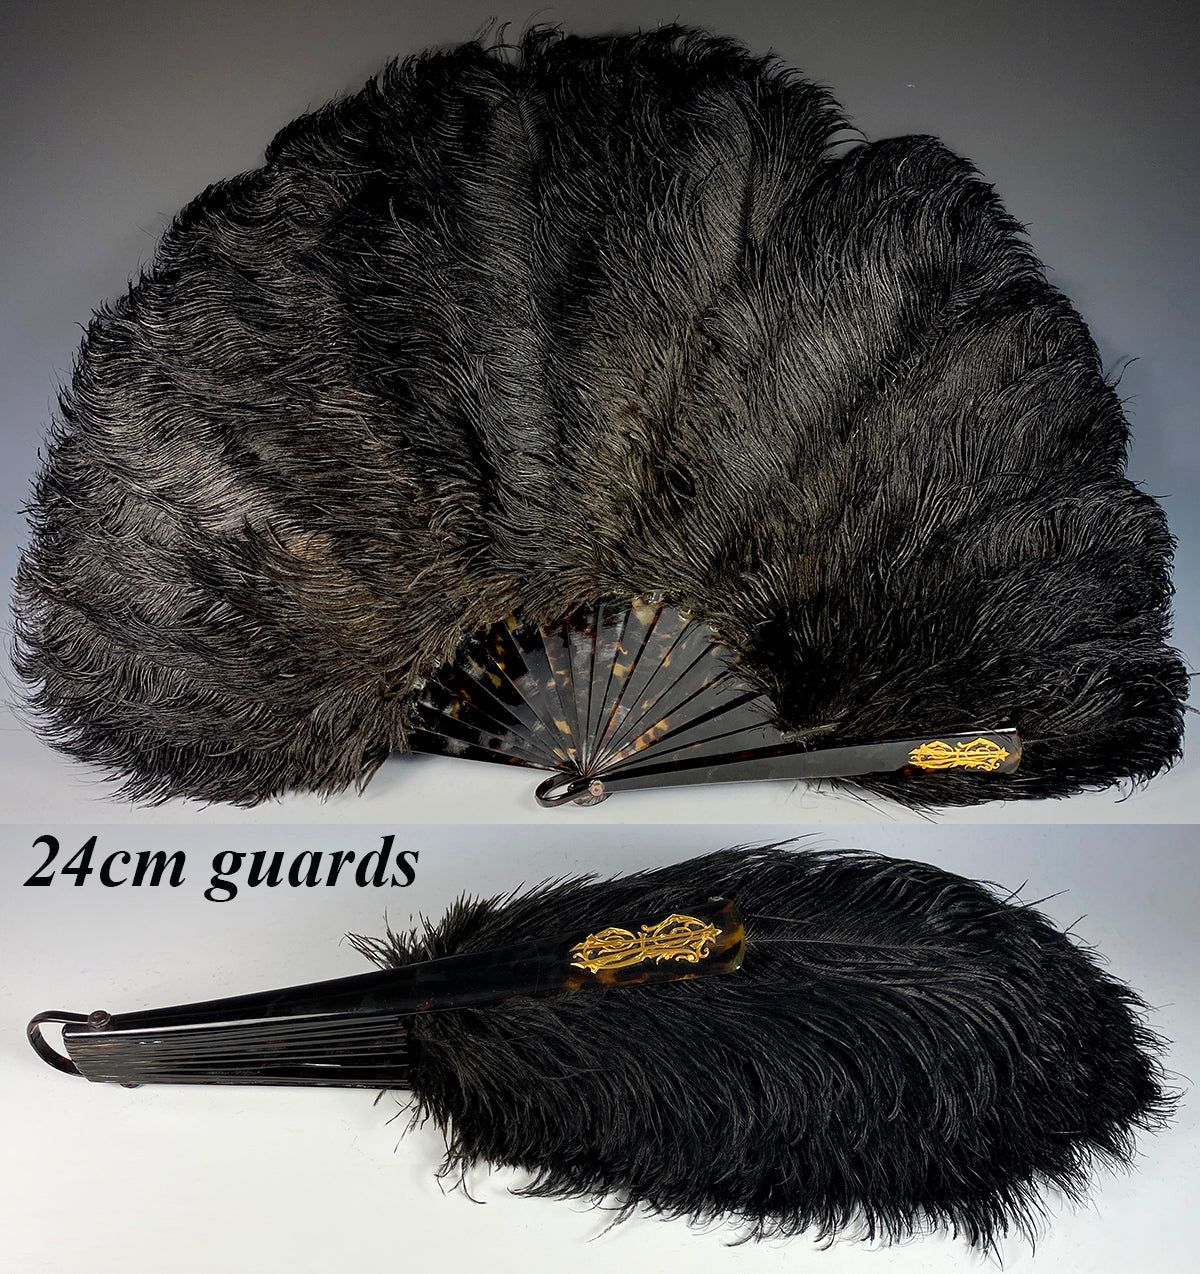 Antiques & Uncommon Treasure Opulent Large French Ostrich Feather and Tortoise Shell Hand Fan, 24cm Guards W Gold Monogram.